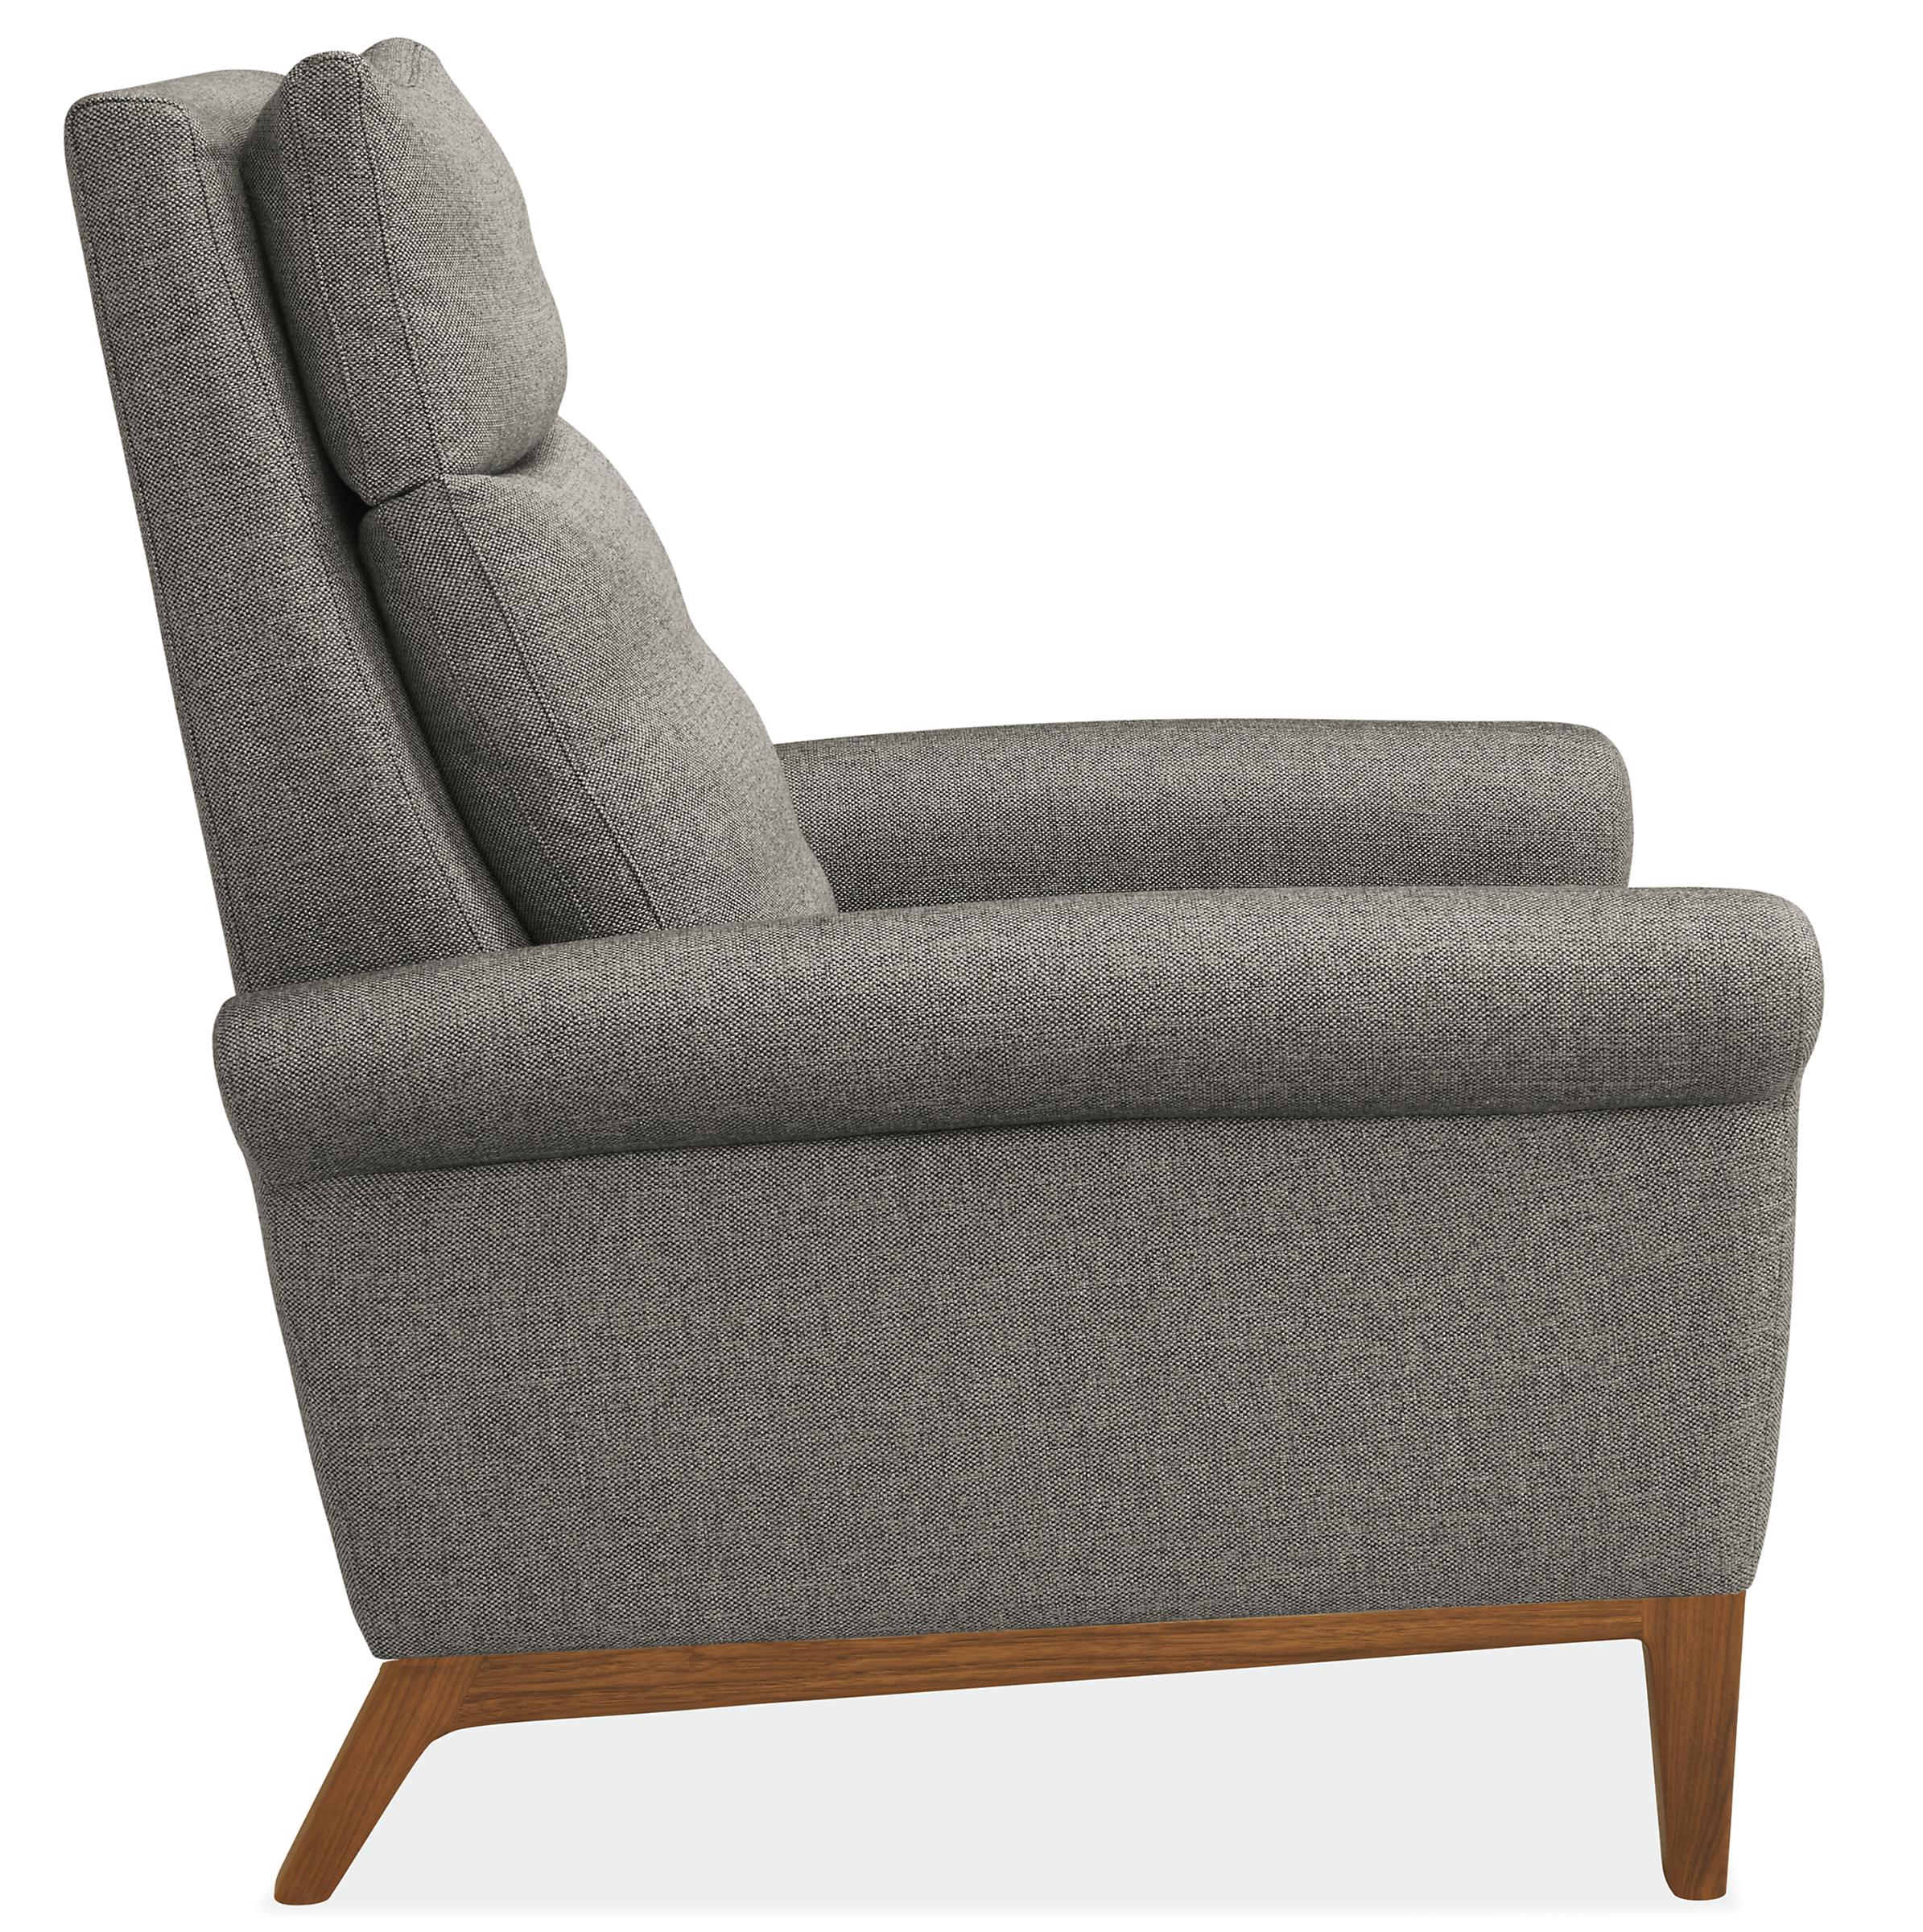 Side view of Isaac Select Recliner Rolled-Arm in Sumner Fabric with Wood Base.